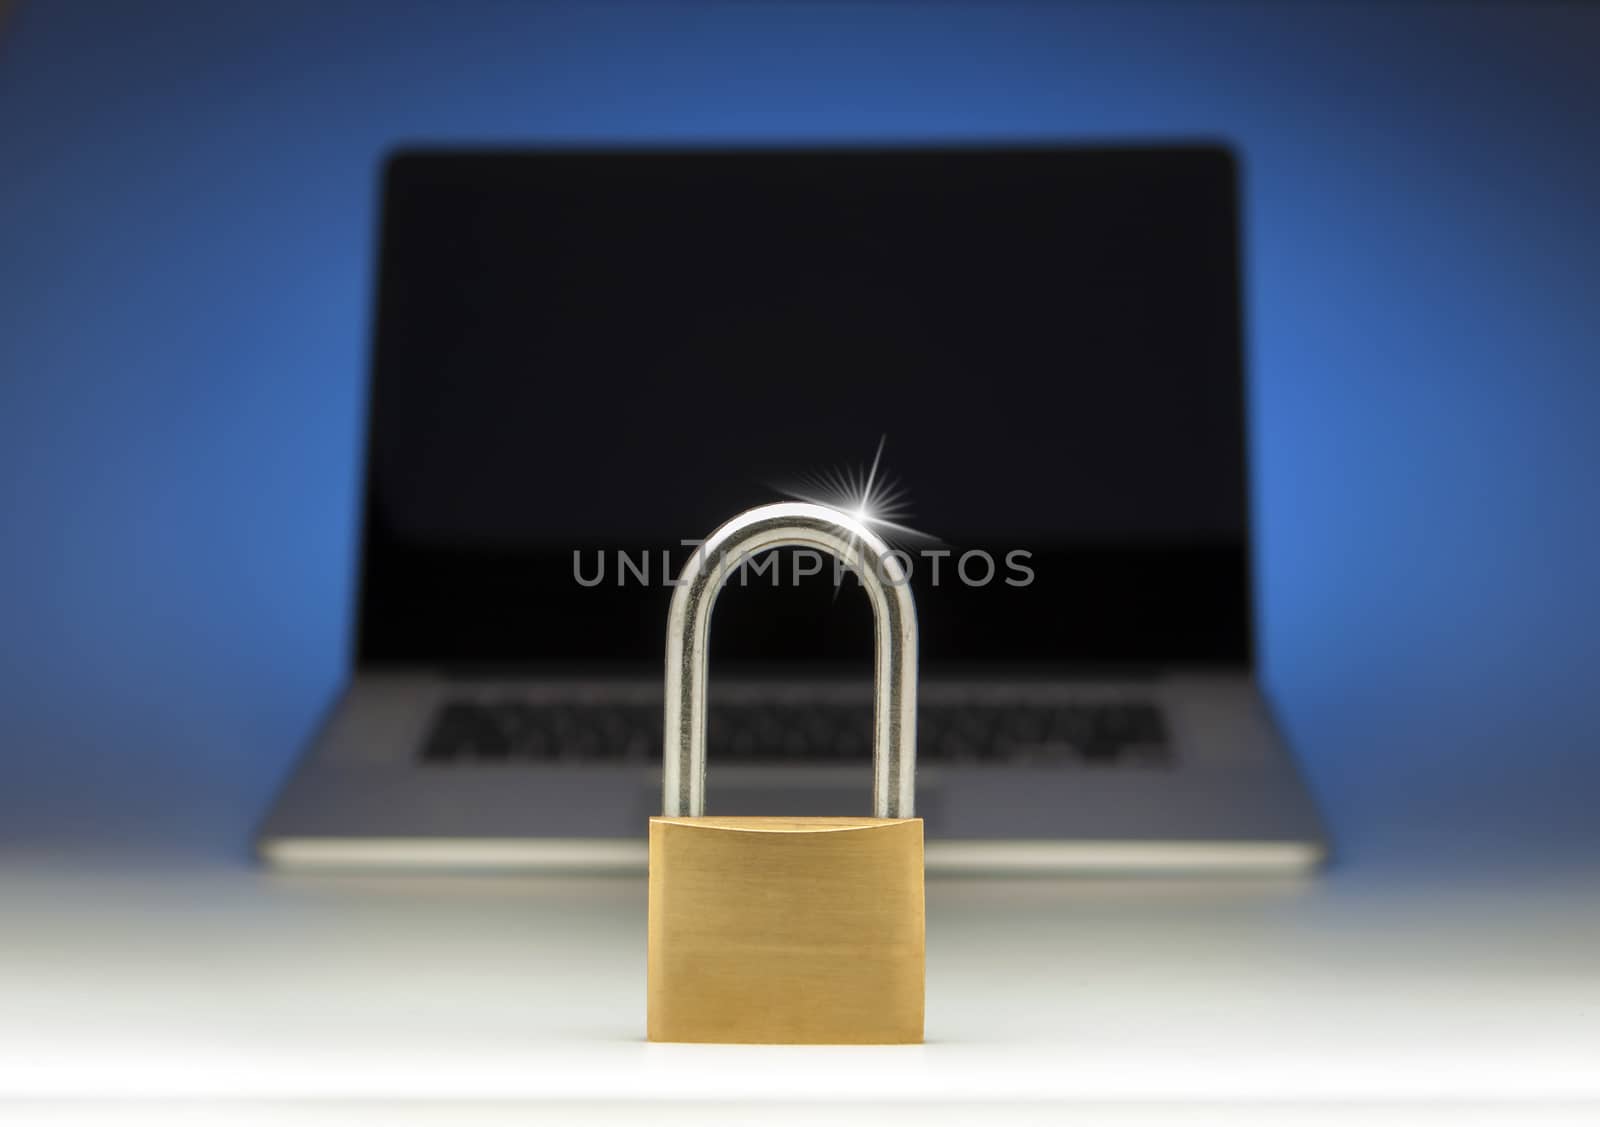 Computer internet security concept with padlock as symbol